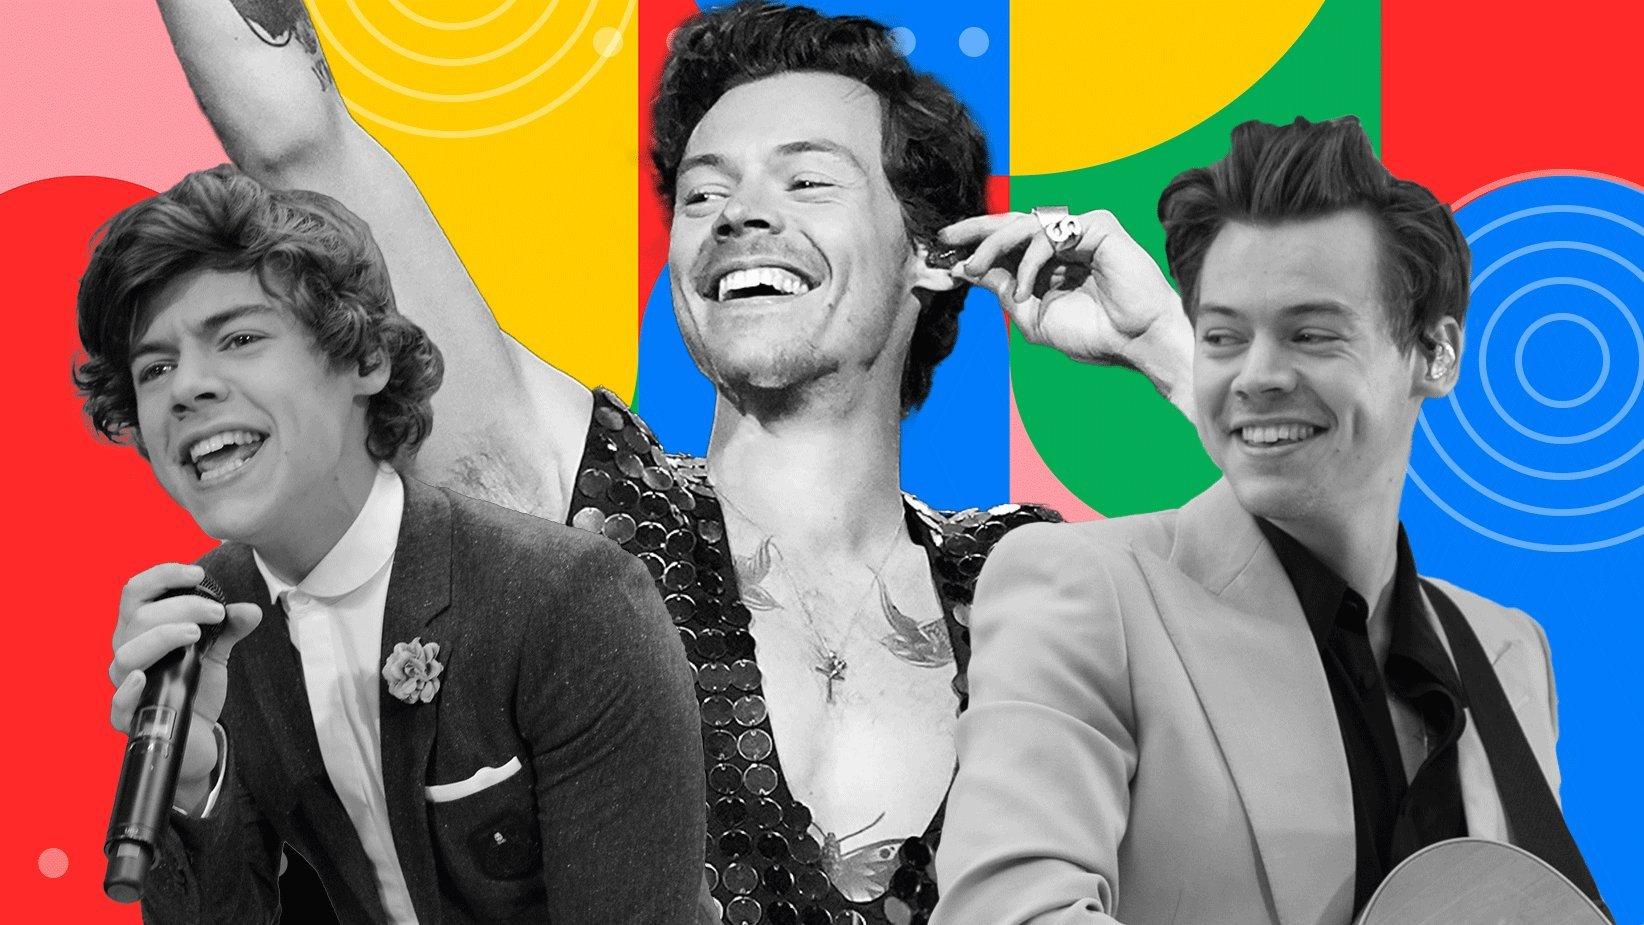 Harry Styles Sonic Evolution How He Grew From Teen Pop Idol To Ever-Evolving Superstar GRAMMY picture